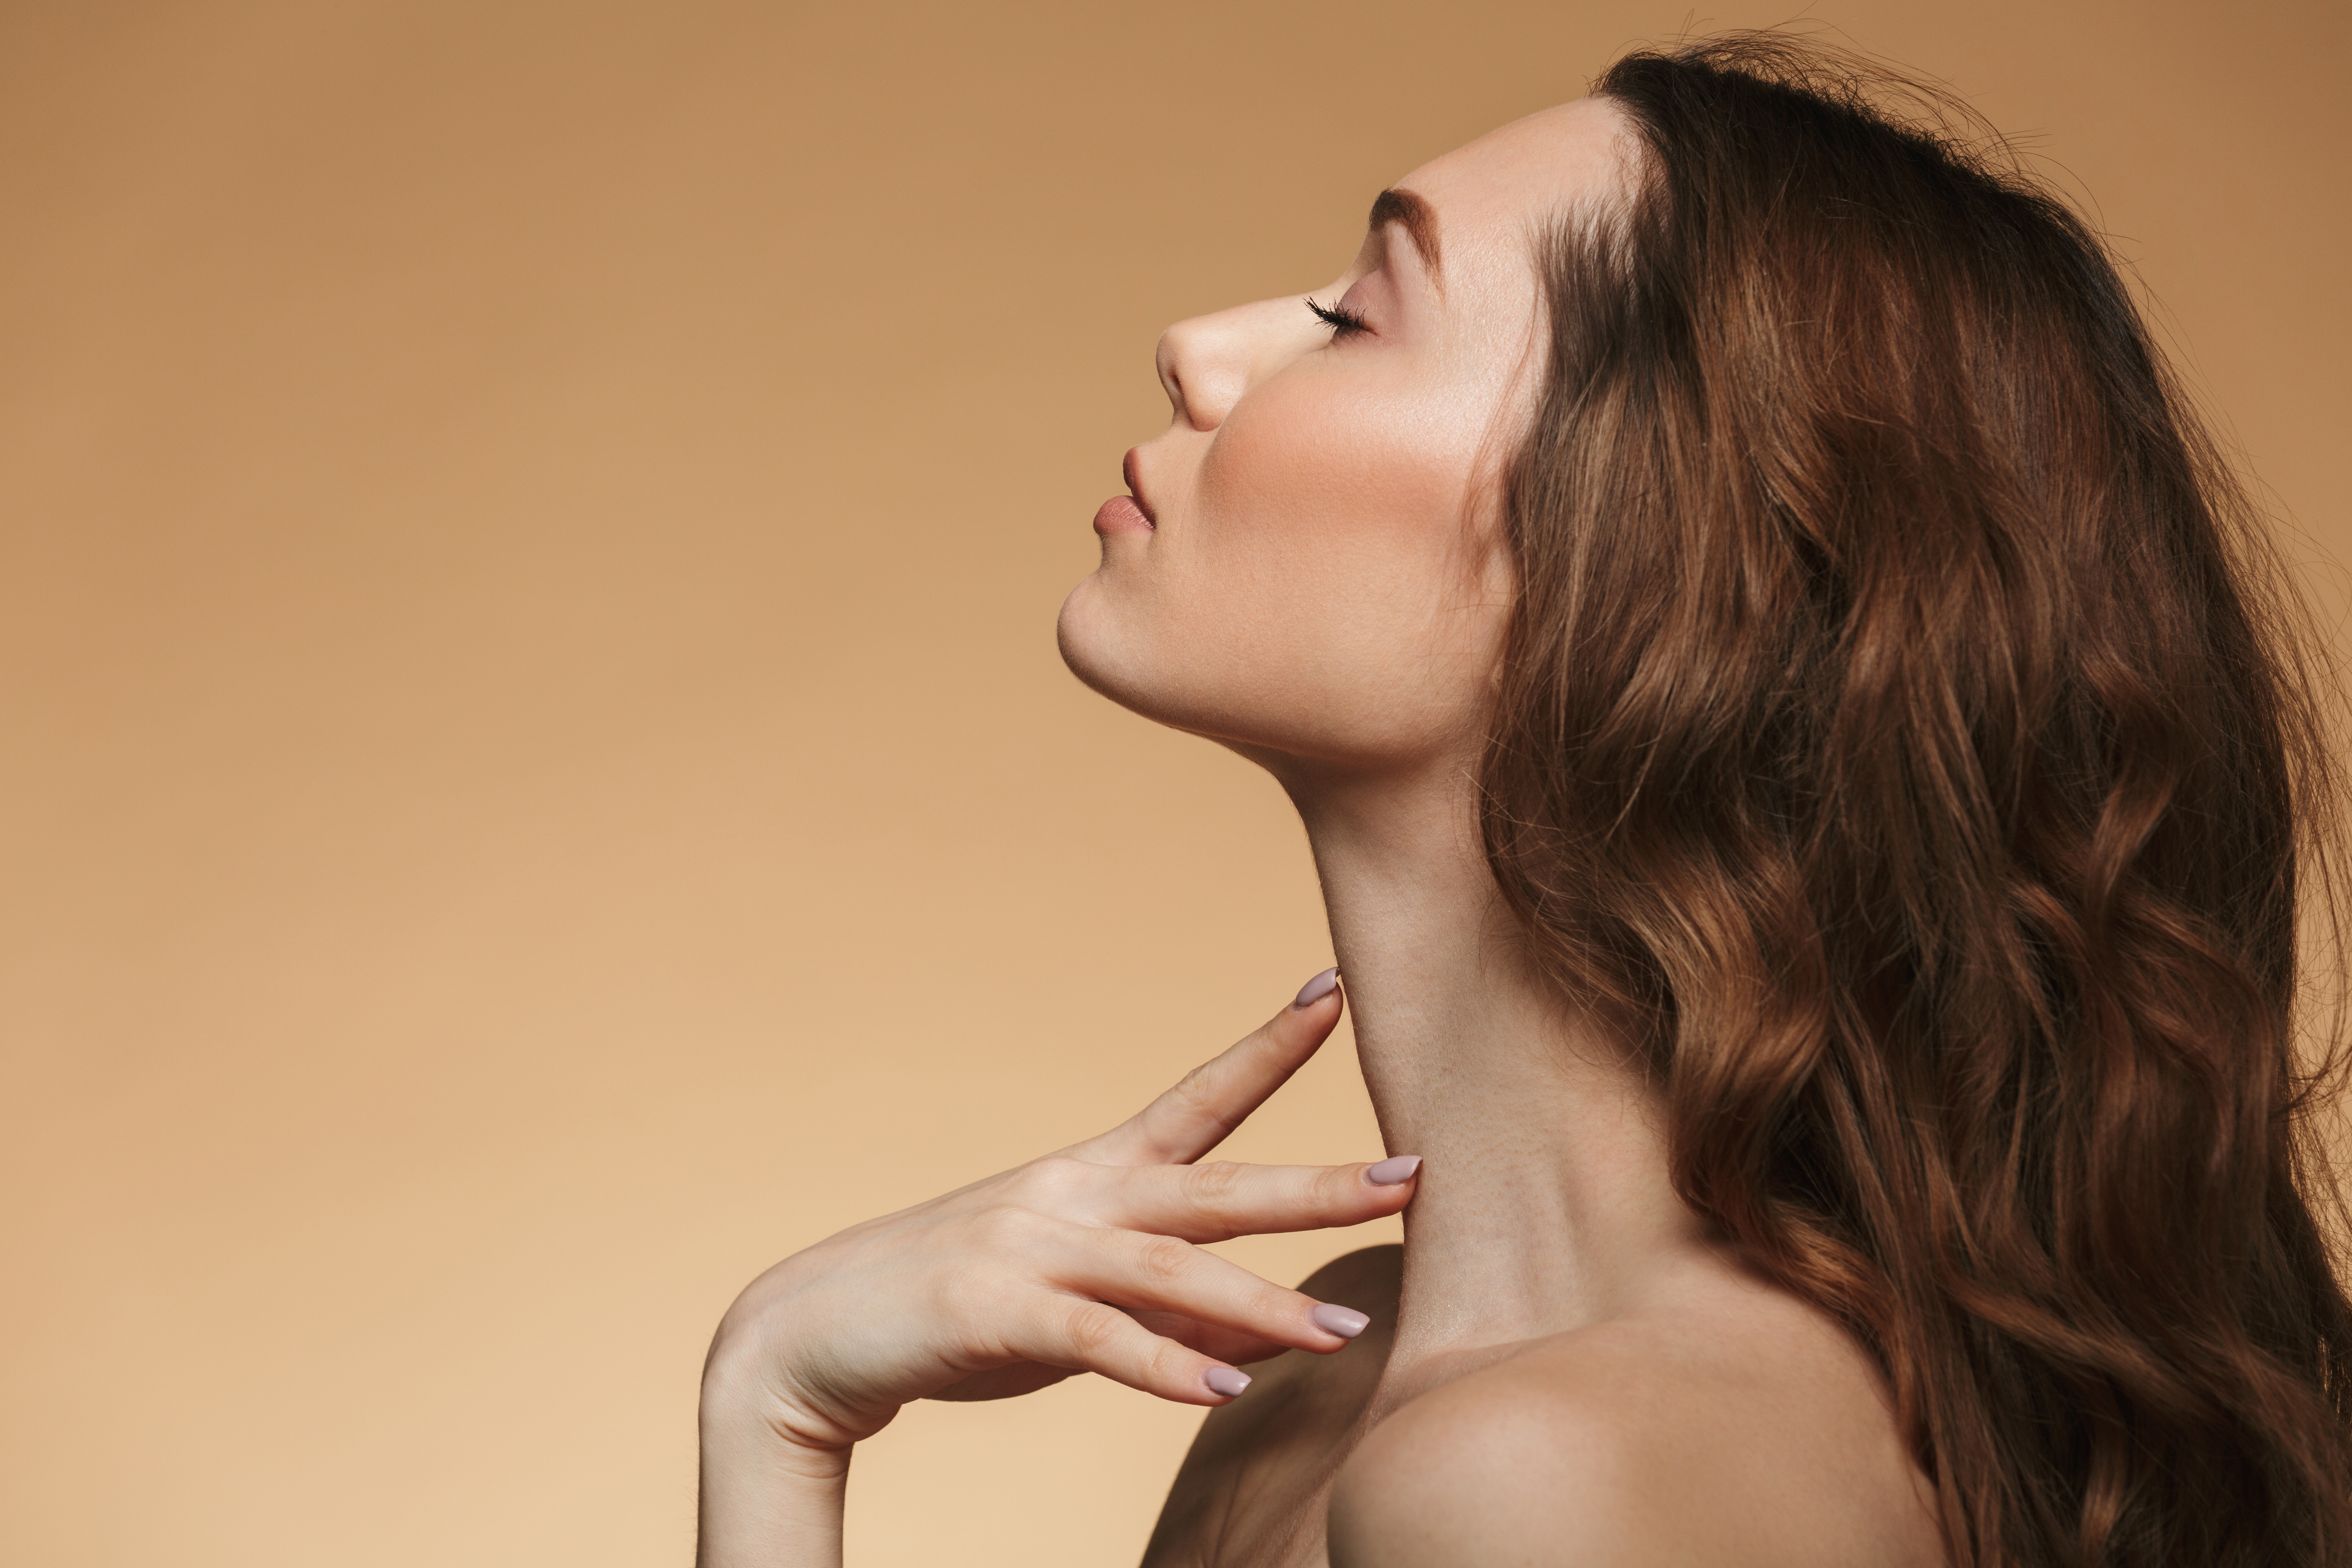 Woman with deep brown hair closing her eyes as she tilts her head back | Source: Shutterstock